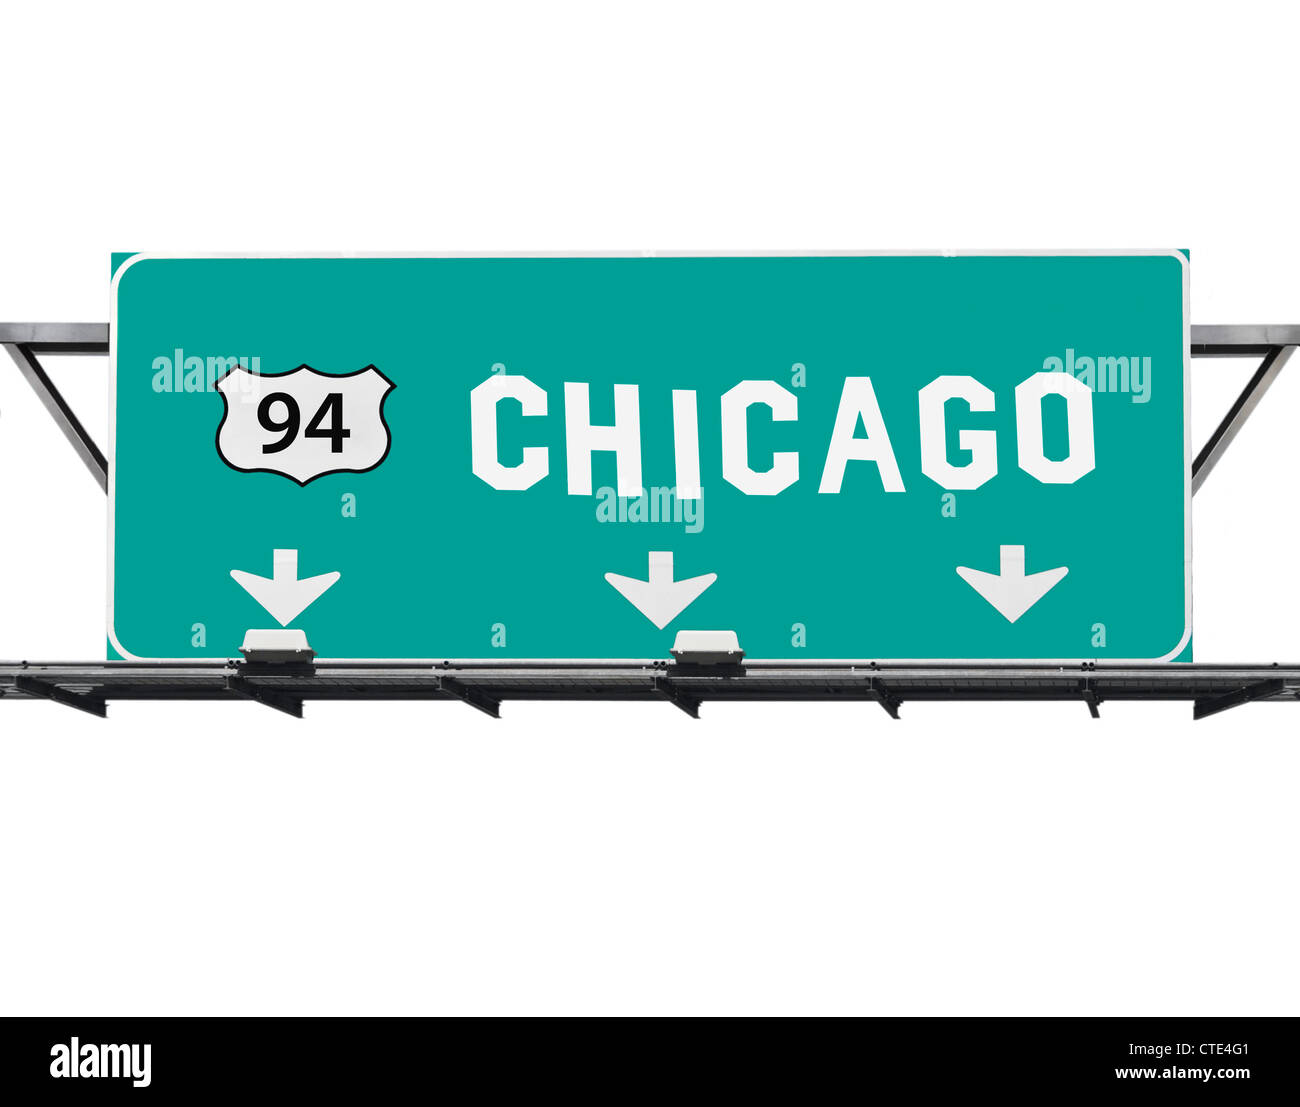 Chicago 94 freeway sign with hand made font. Banque D'Images